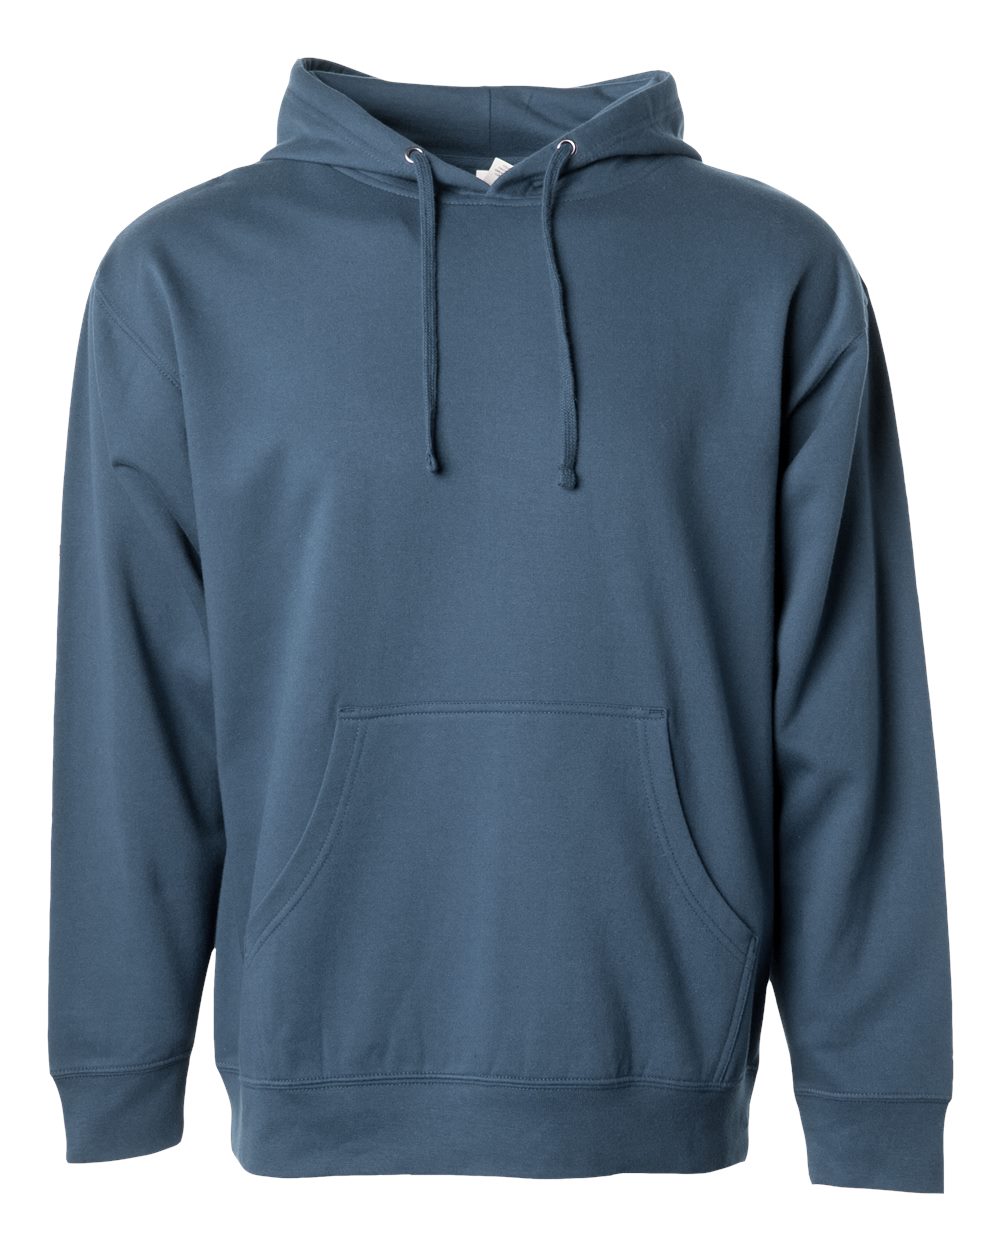 Independent Trading Co. SS4500 - Midweight Hooded Pullover